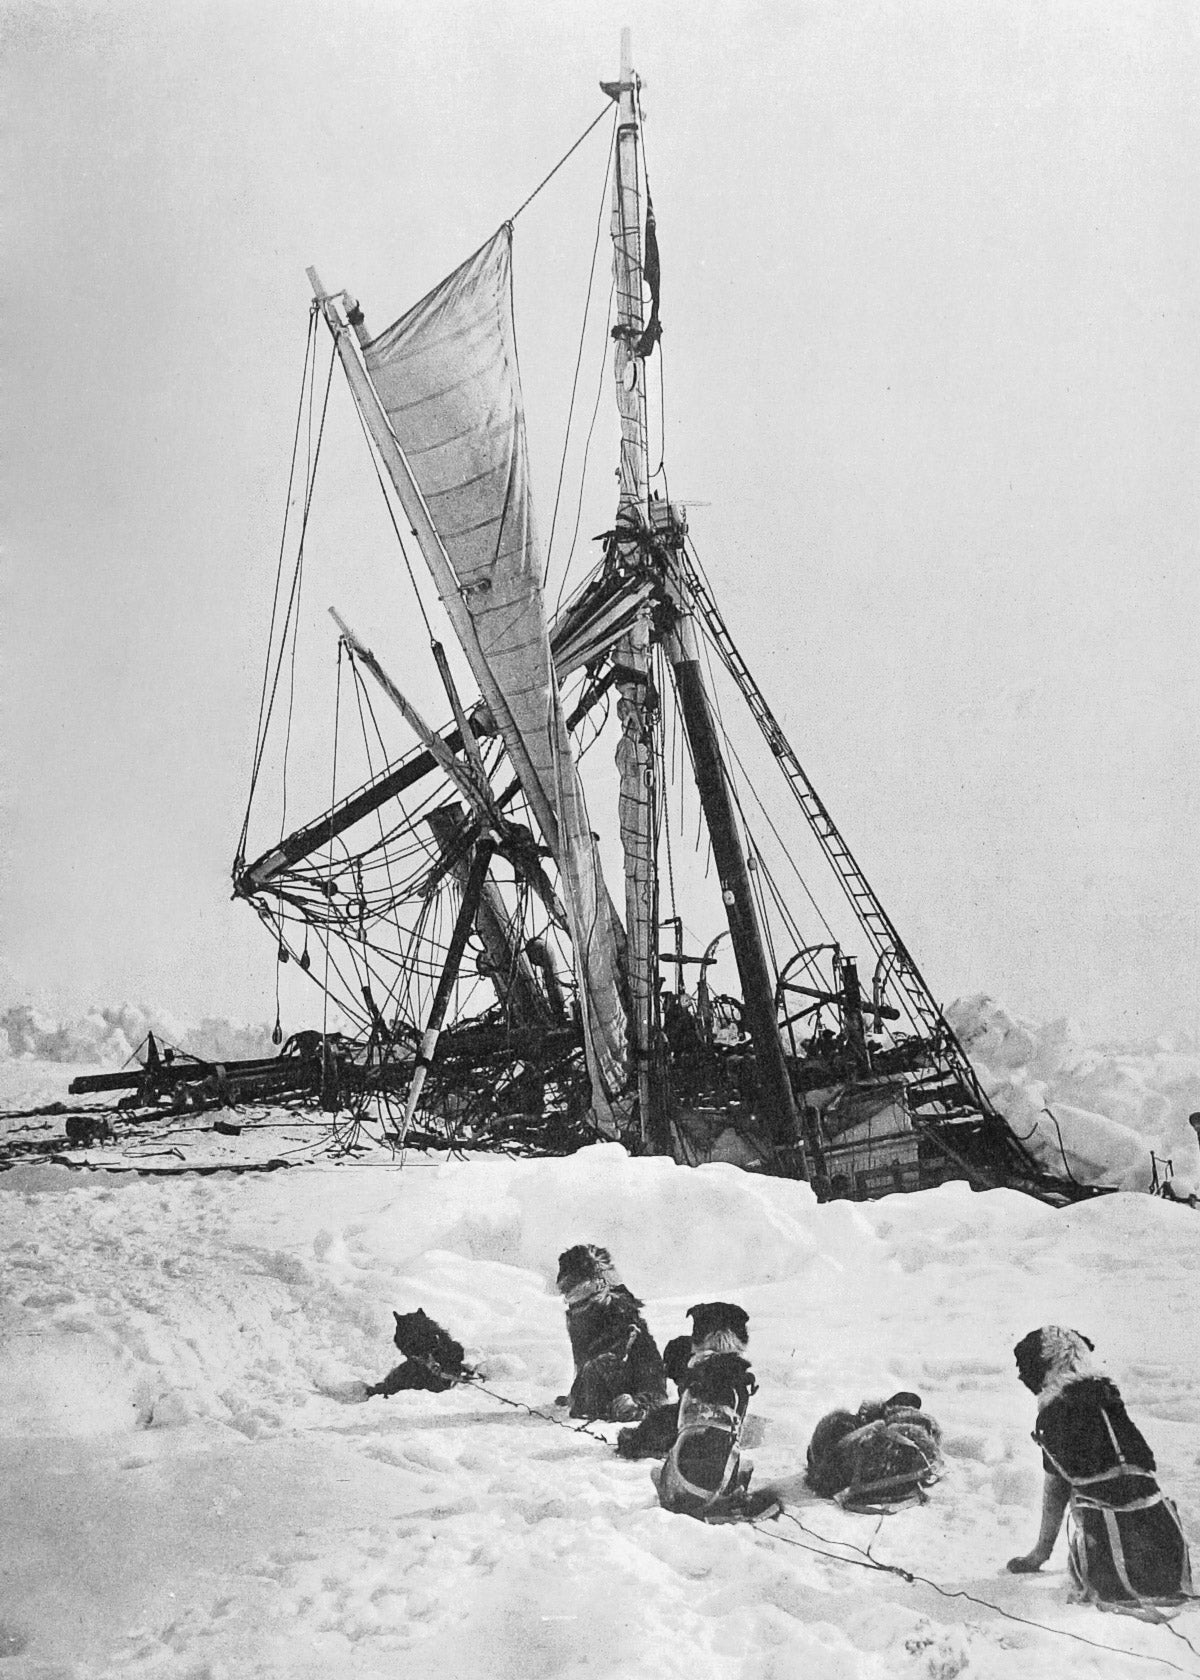 Endurance just prior to plunging through the Antarctic ice in November 1915.  (Photo: Royal Grographic Society, Fair Use)